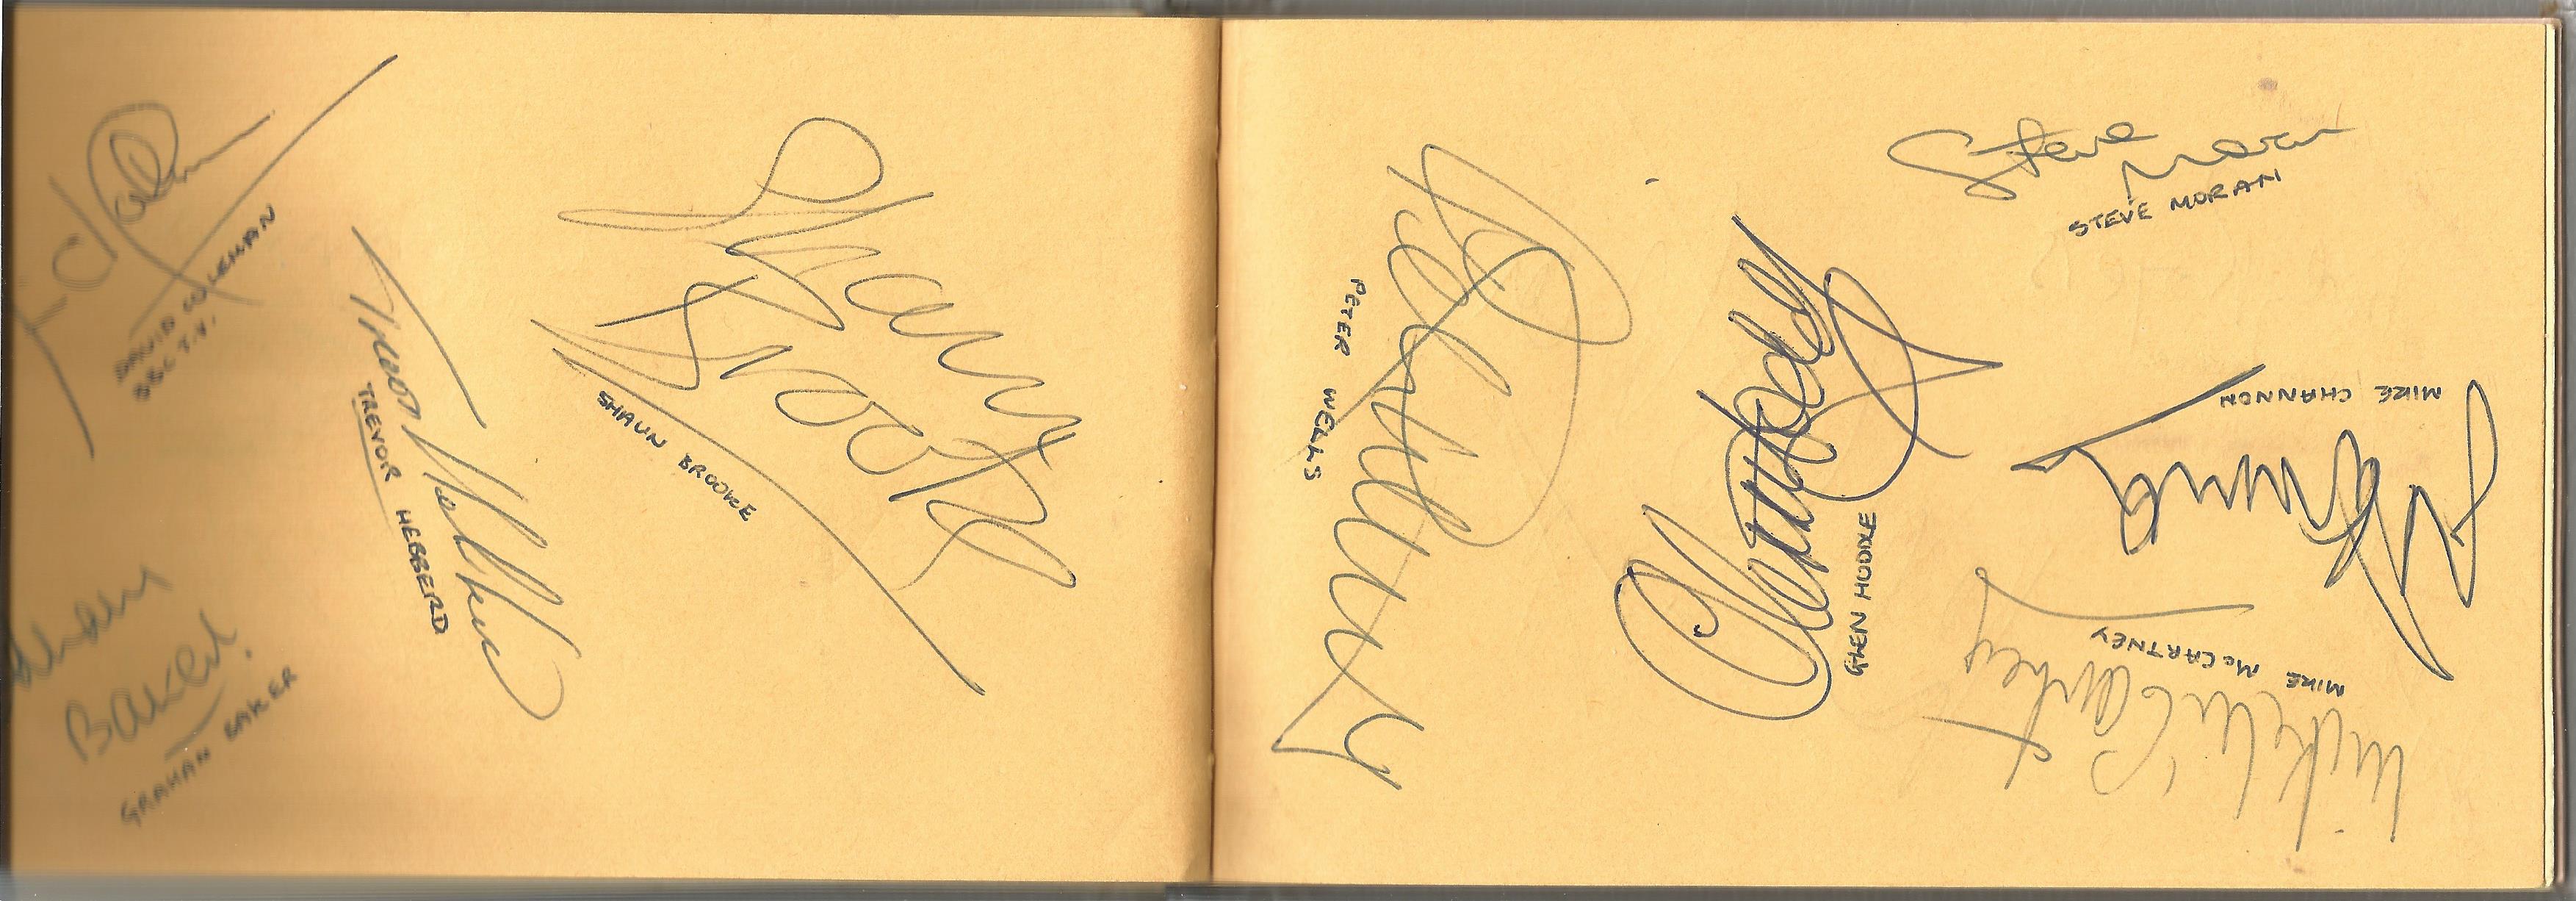 Football and Cricket Legends Autograph book over 150 signatures from some legendary names of the - Image 8 of 8